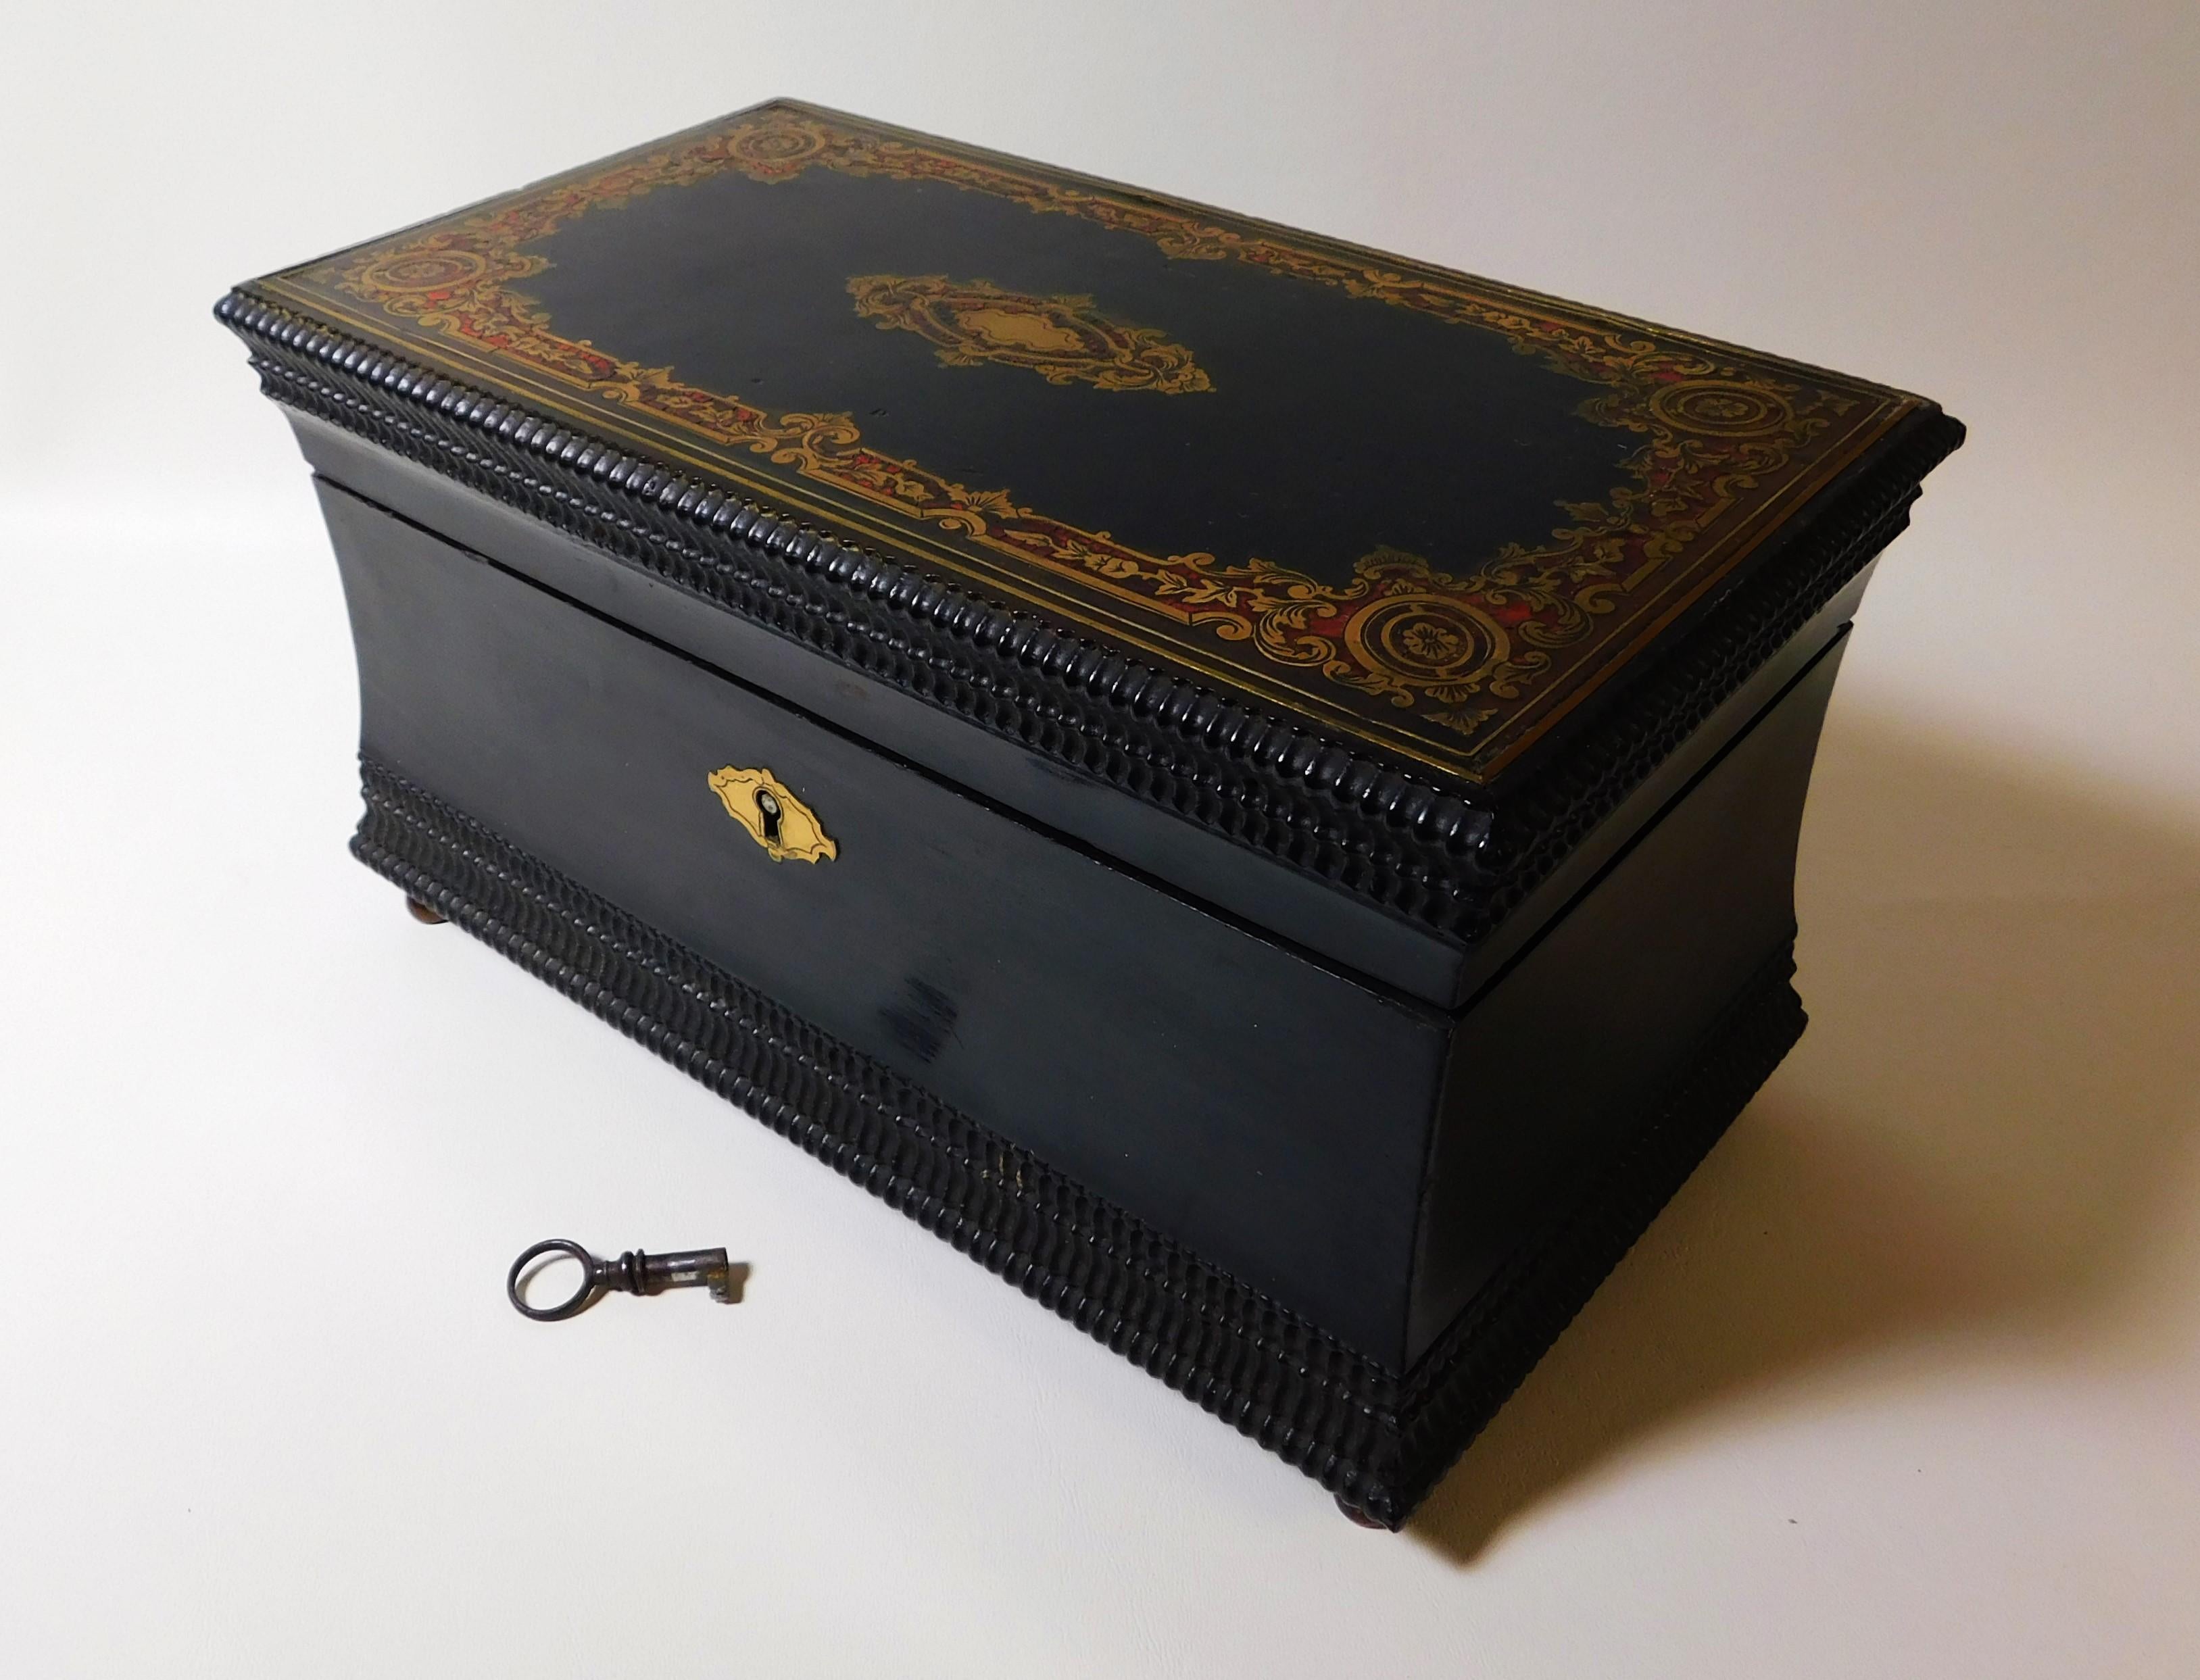 British ebony wood cigar box that was originally a tea caddy box that was converted in the early 20th century into a cigar box, circa 1840s. Beautifully ebonized box on four feet with working brass lock and key and fine inlayed brass and red paint.